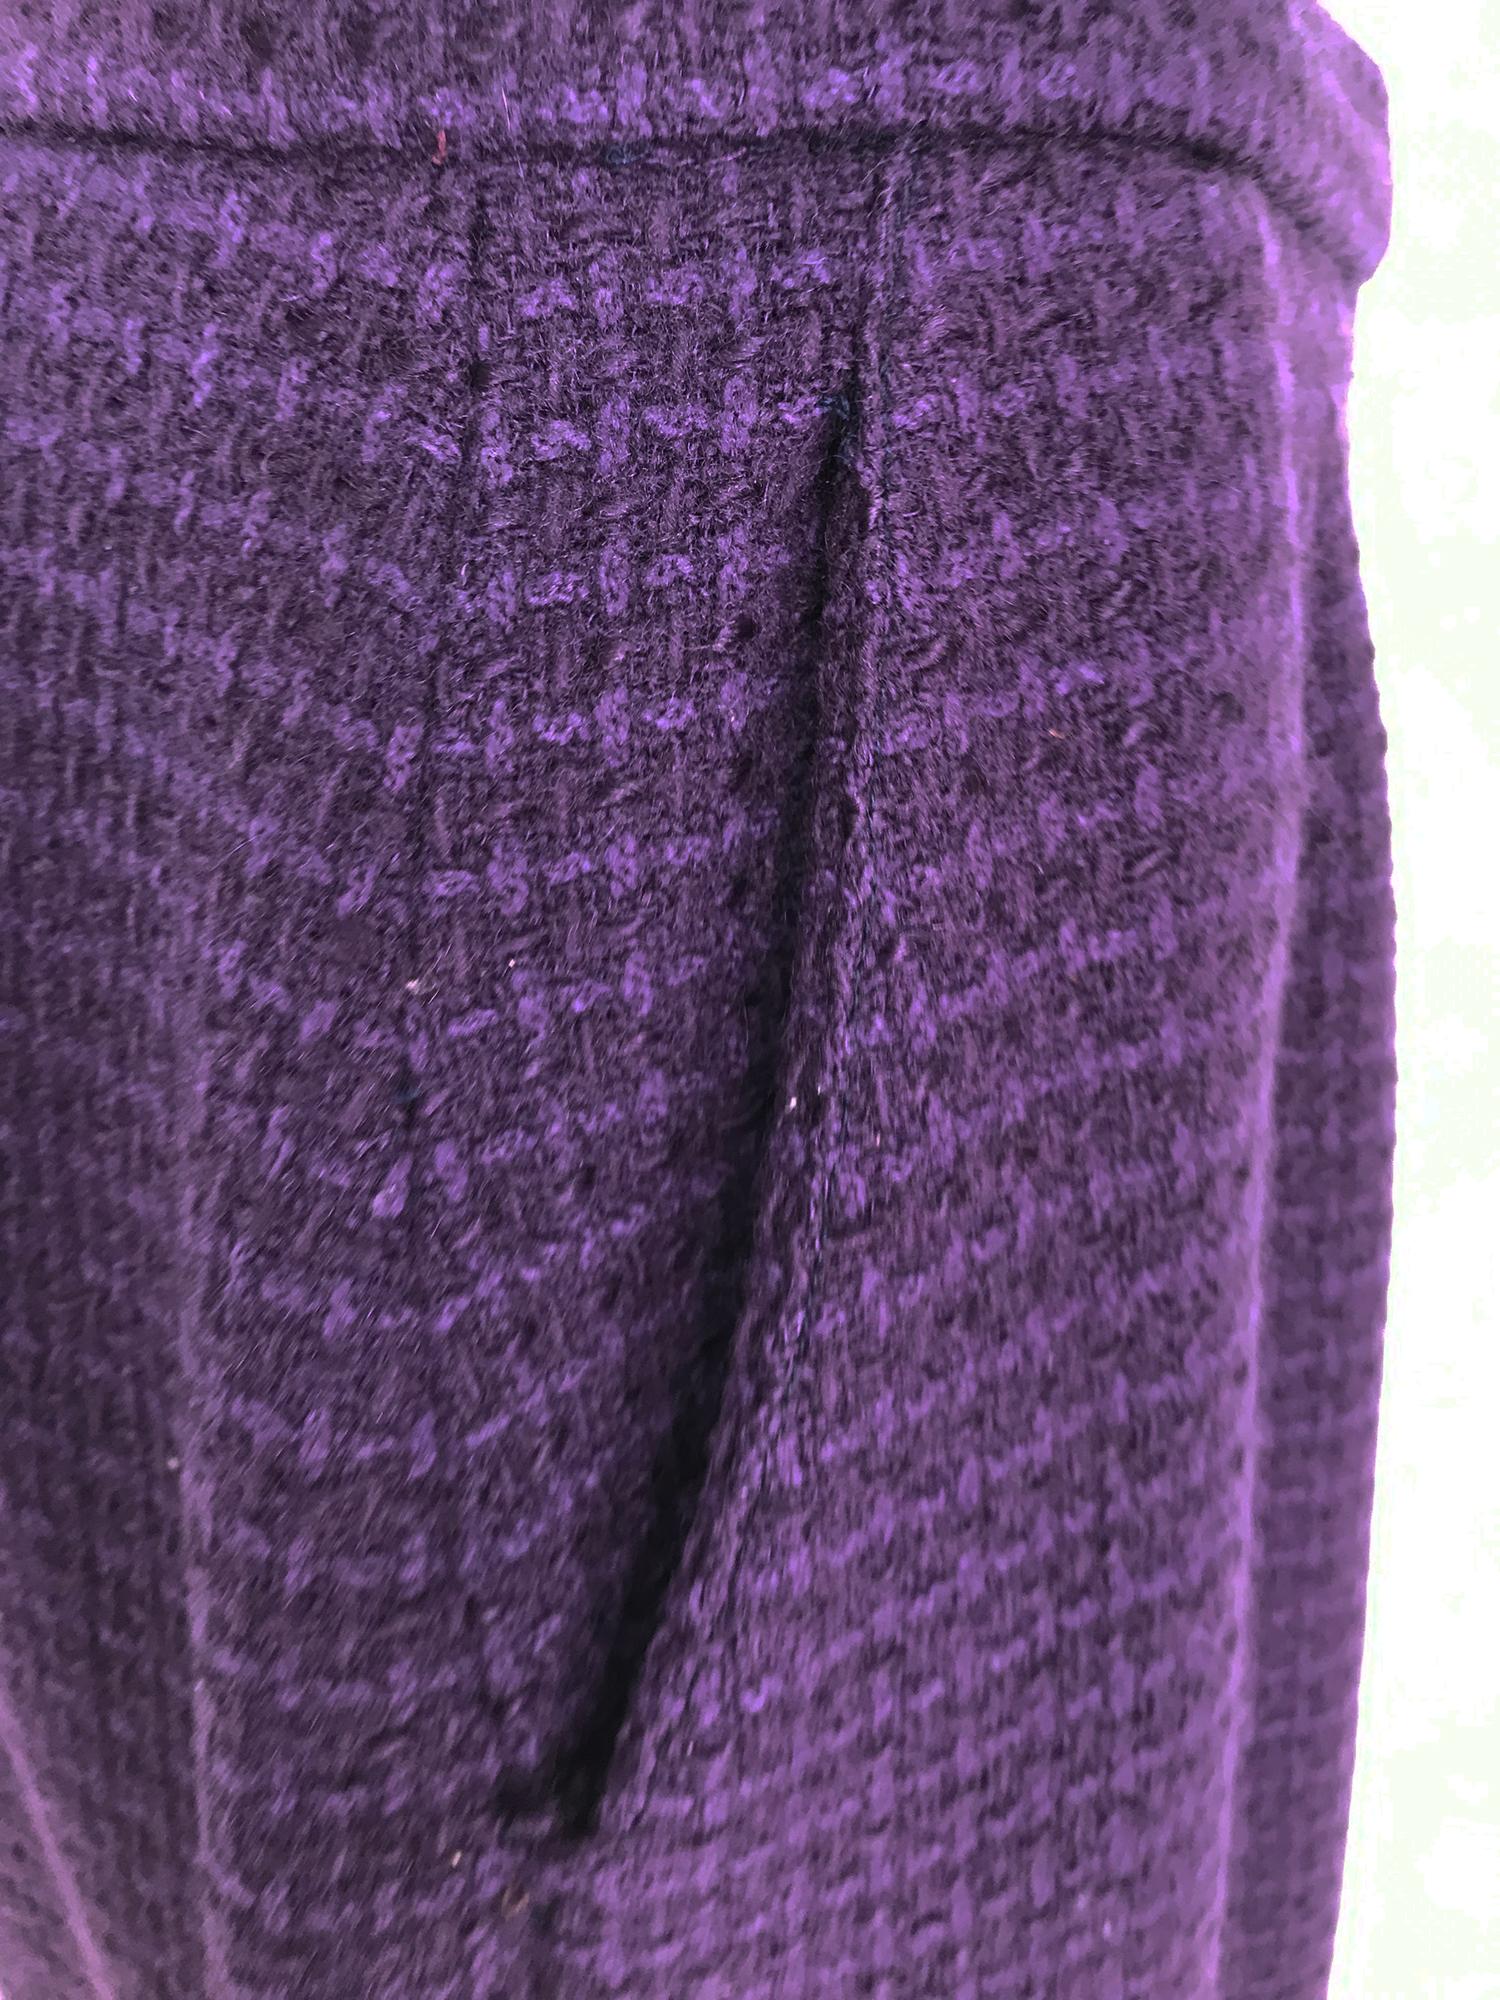 Vintage Chanel Creations Textured Purple Wool Skirt Suit 1970s For Sale 5